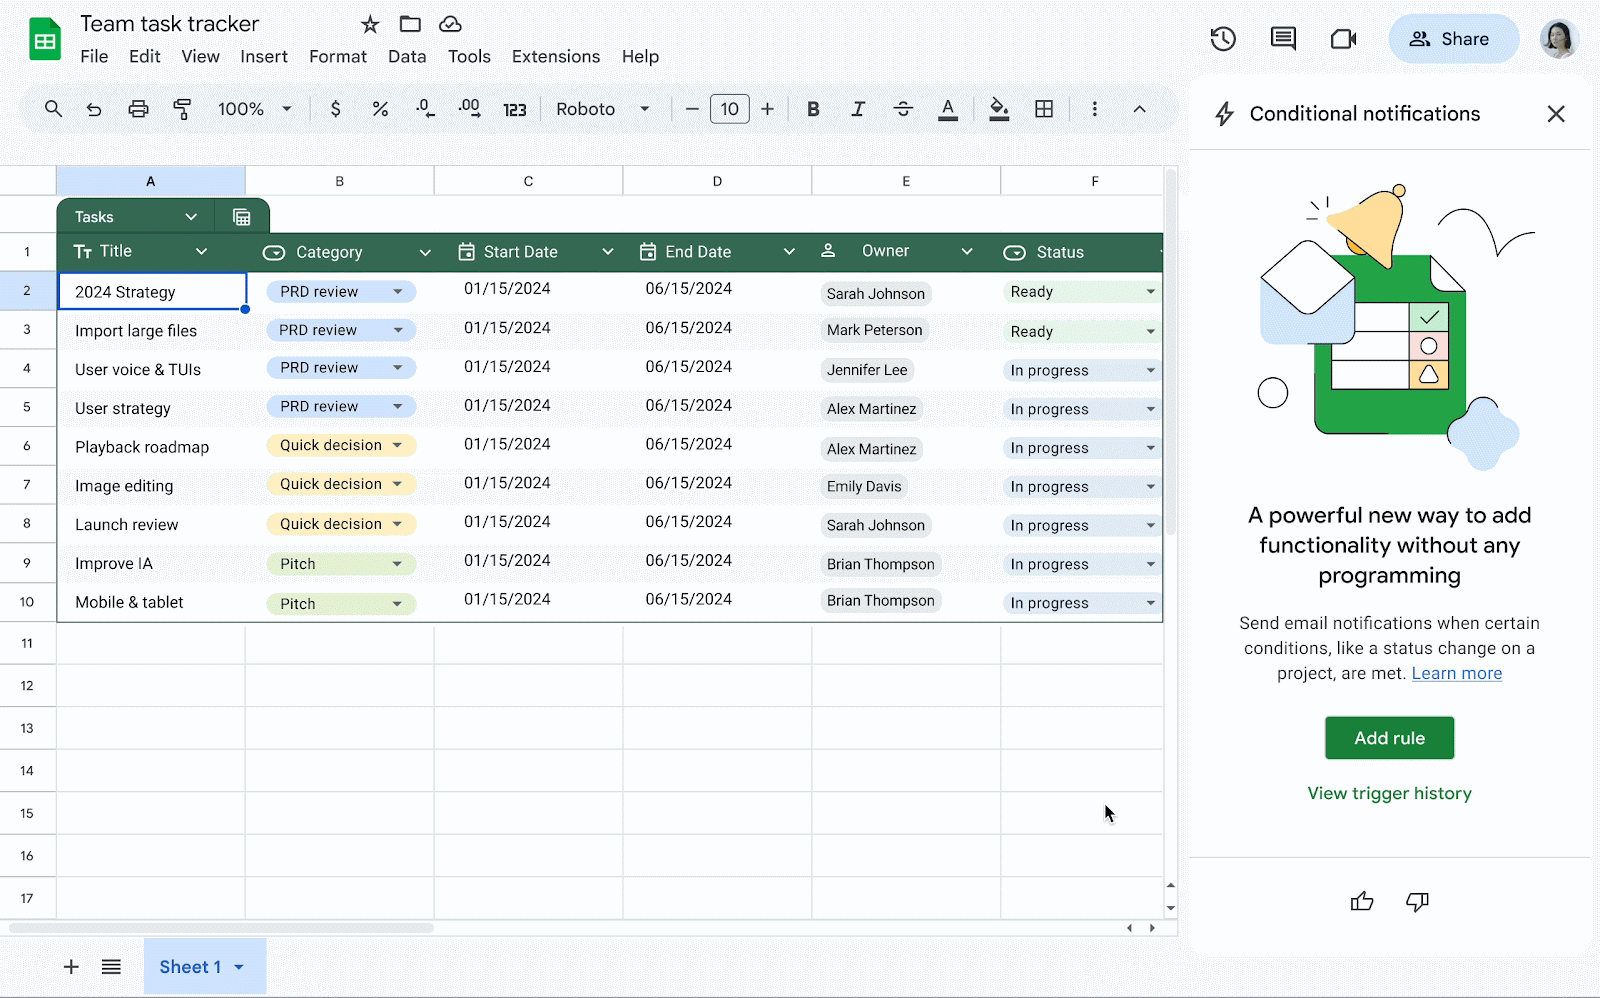 Adding a rule to set up Conditional notifications in Google Sheets